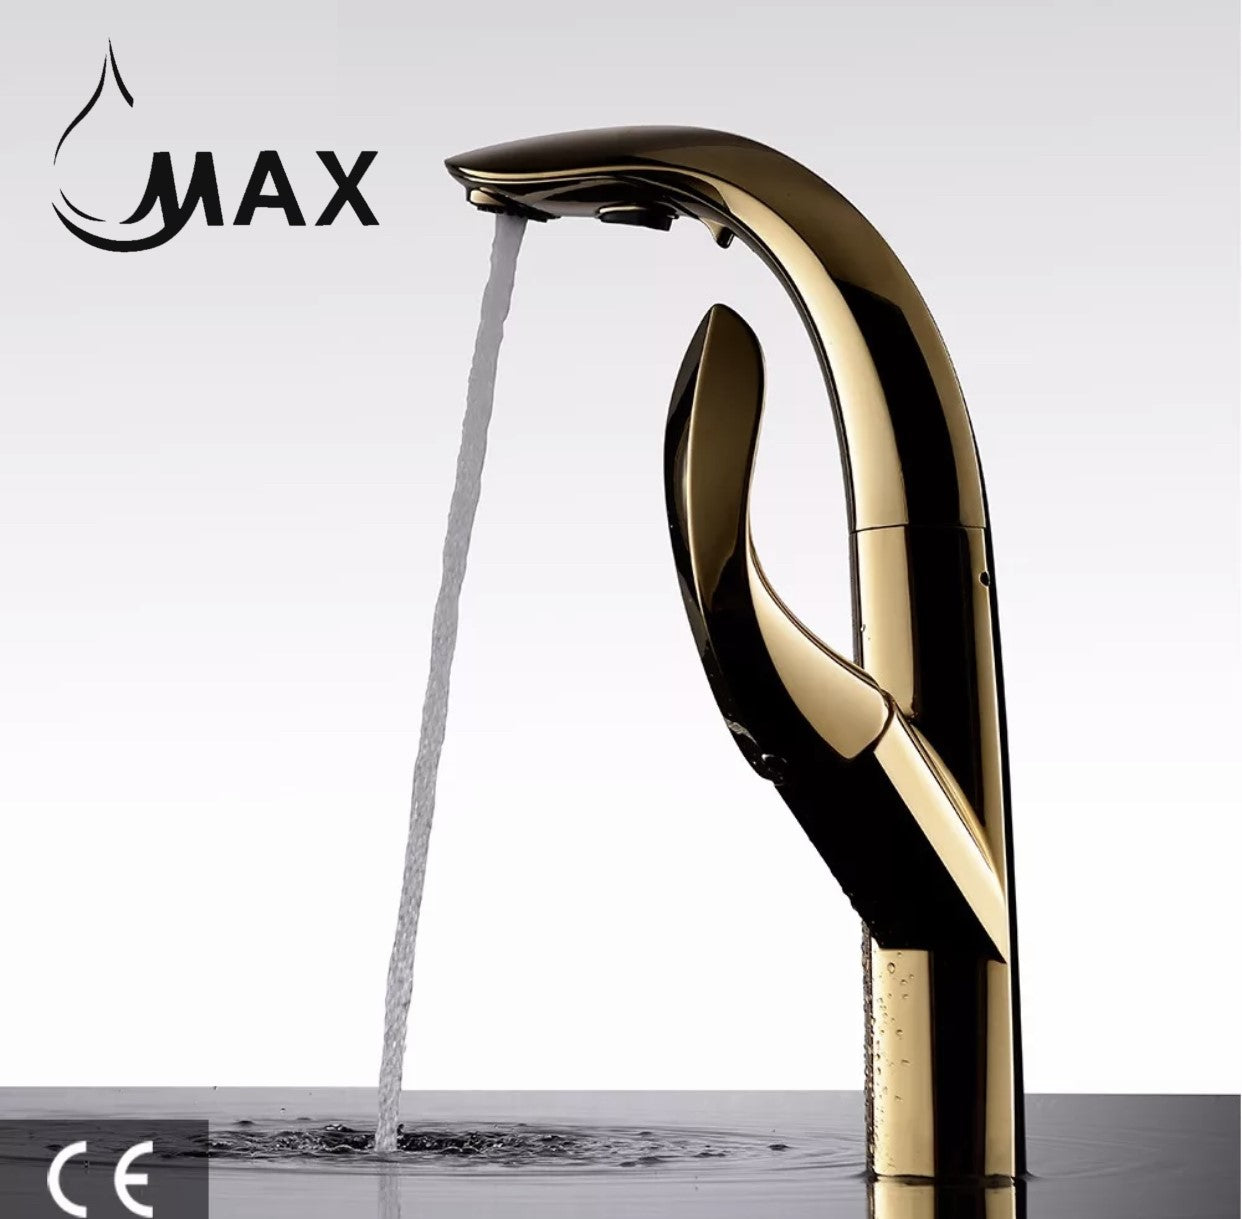 Pull-Out Kitchen Faucet High-Arc Single Handle 14.5" Shiny Gold Finish